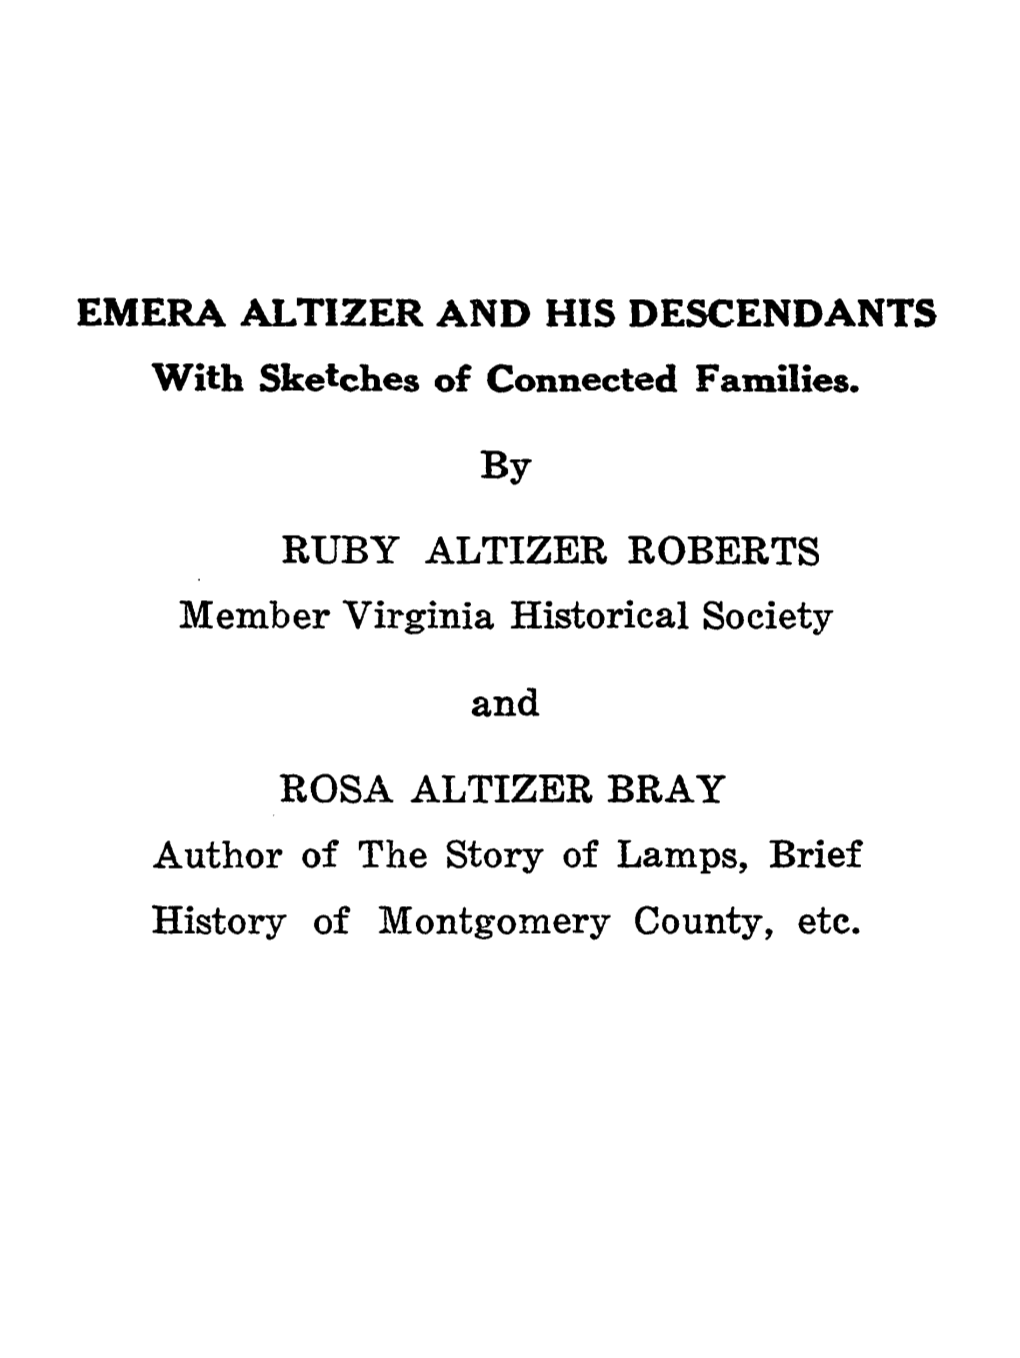 Emera Altizer and His Descendants. with Sketches of Connected Families